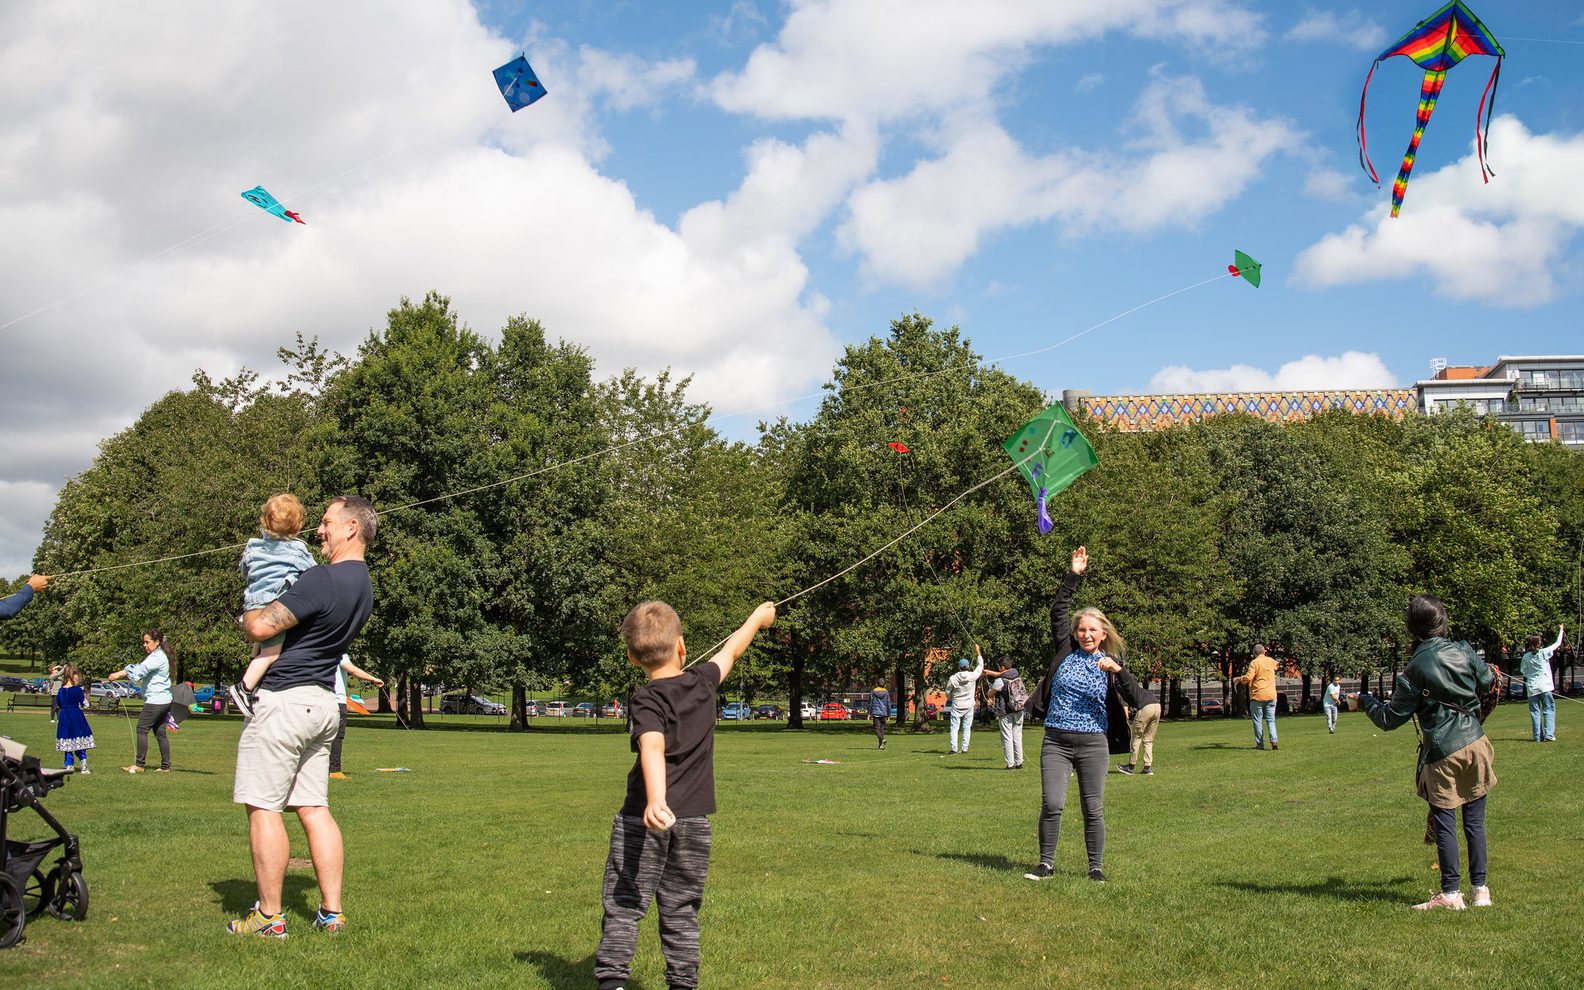 Several people in a park flying kites.